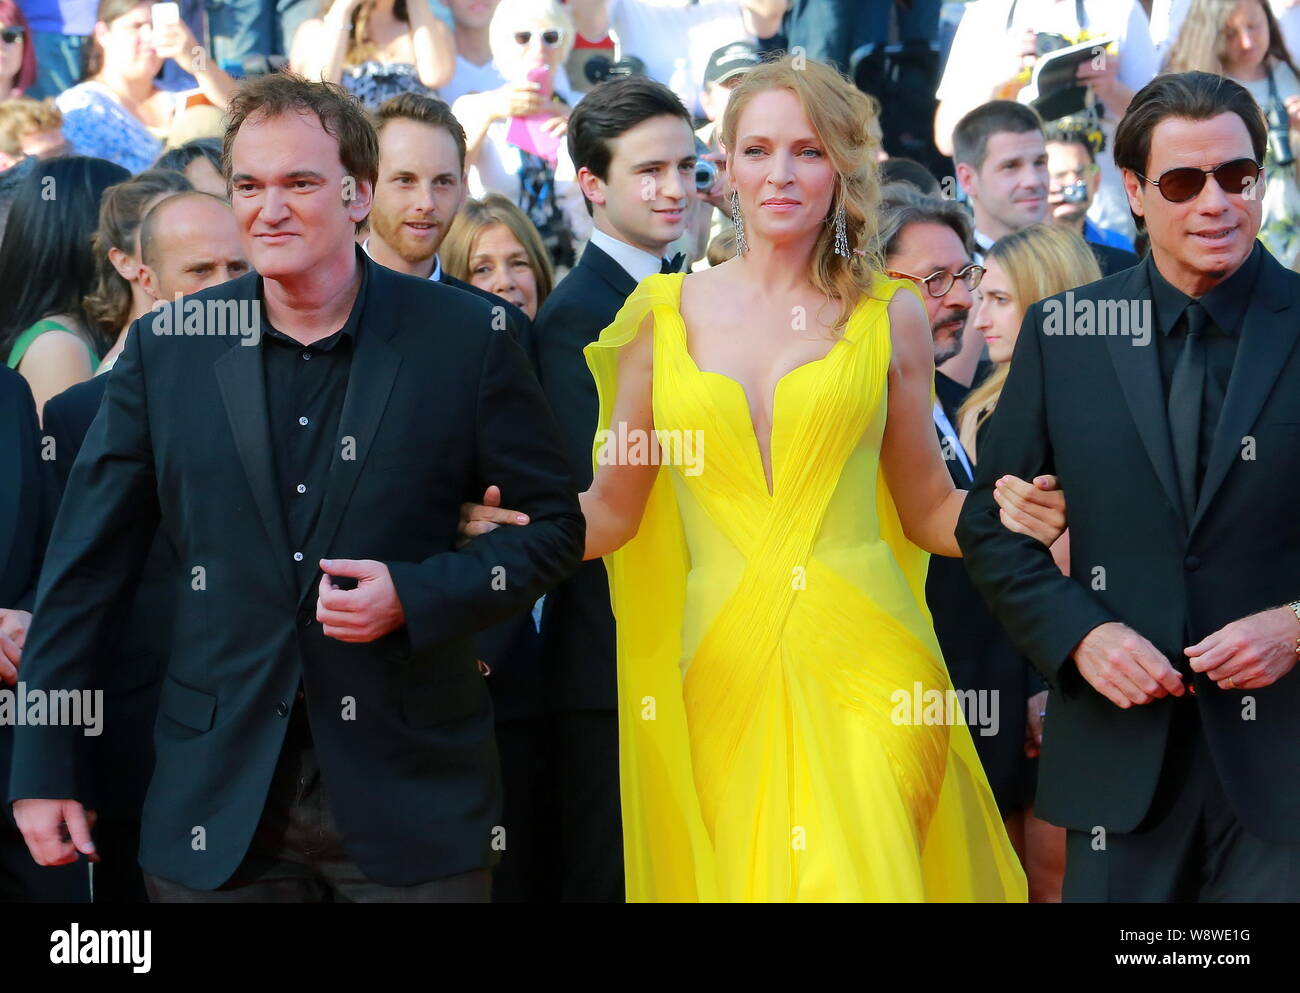 (From left) American actor Quentin Tarantino, actress Uma Thurman and actor John Travolta pose at a premiere for the movie, Clouds of Sils Maria, duri Stock Photo